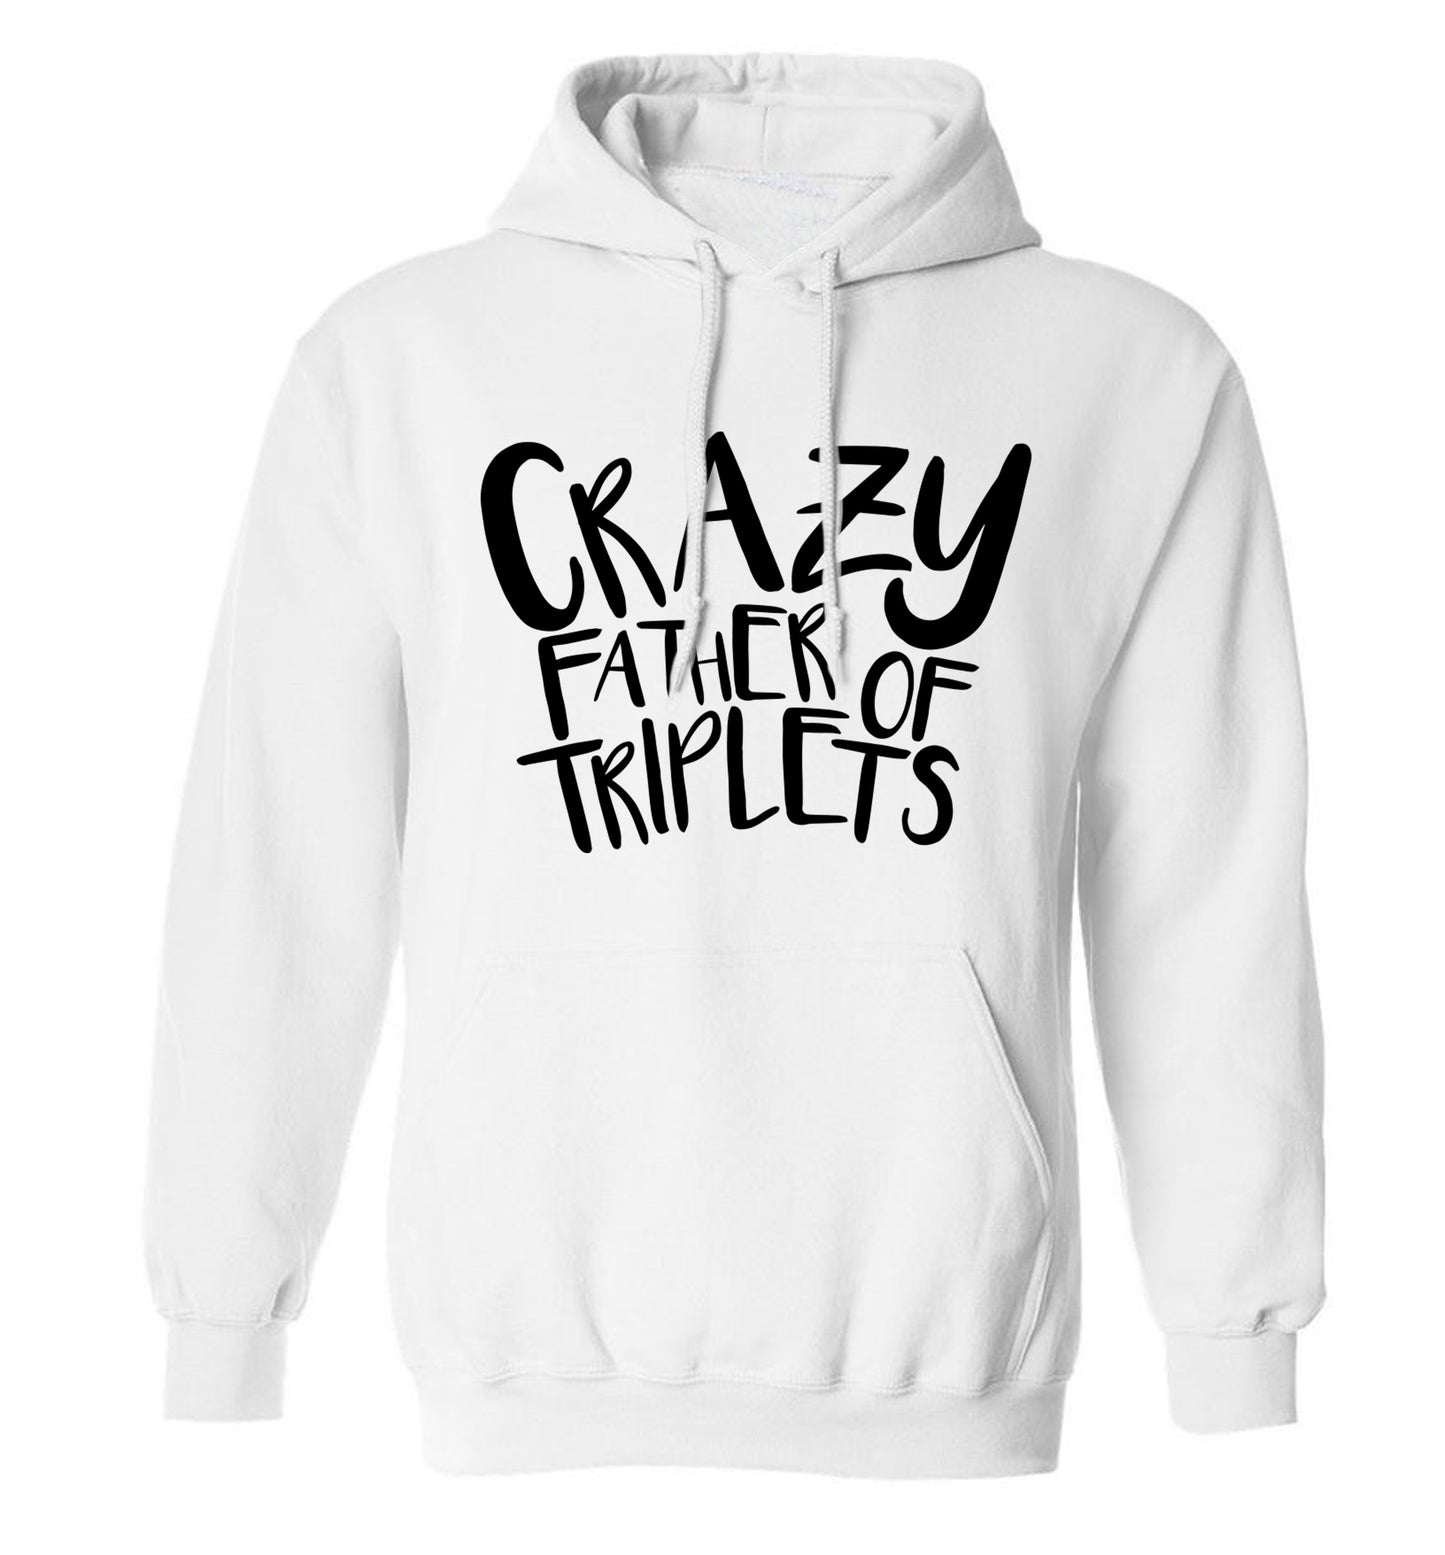 Crazy father of triplets adults unisex white hoodie 2XL